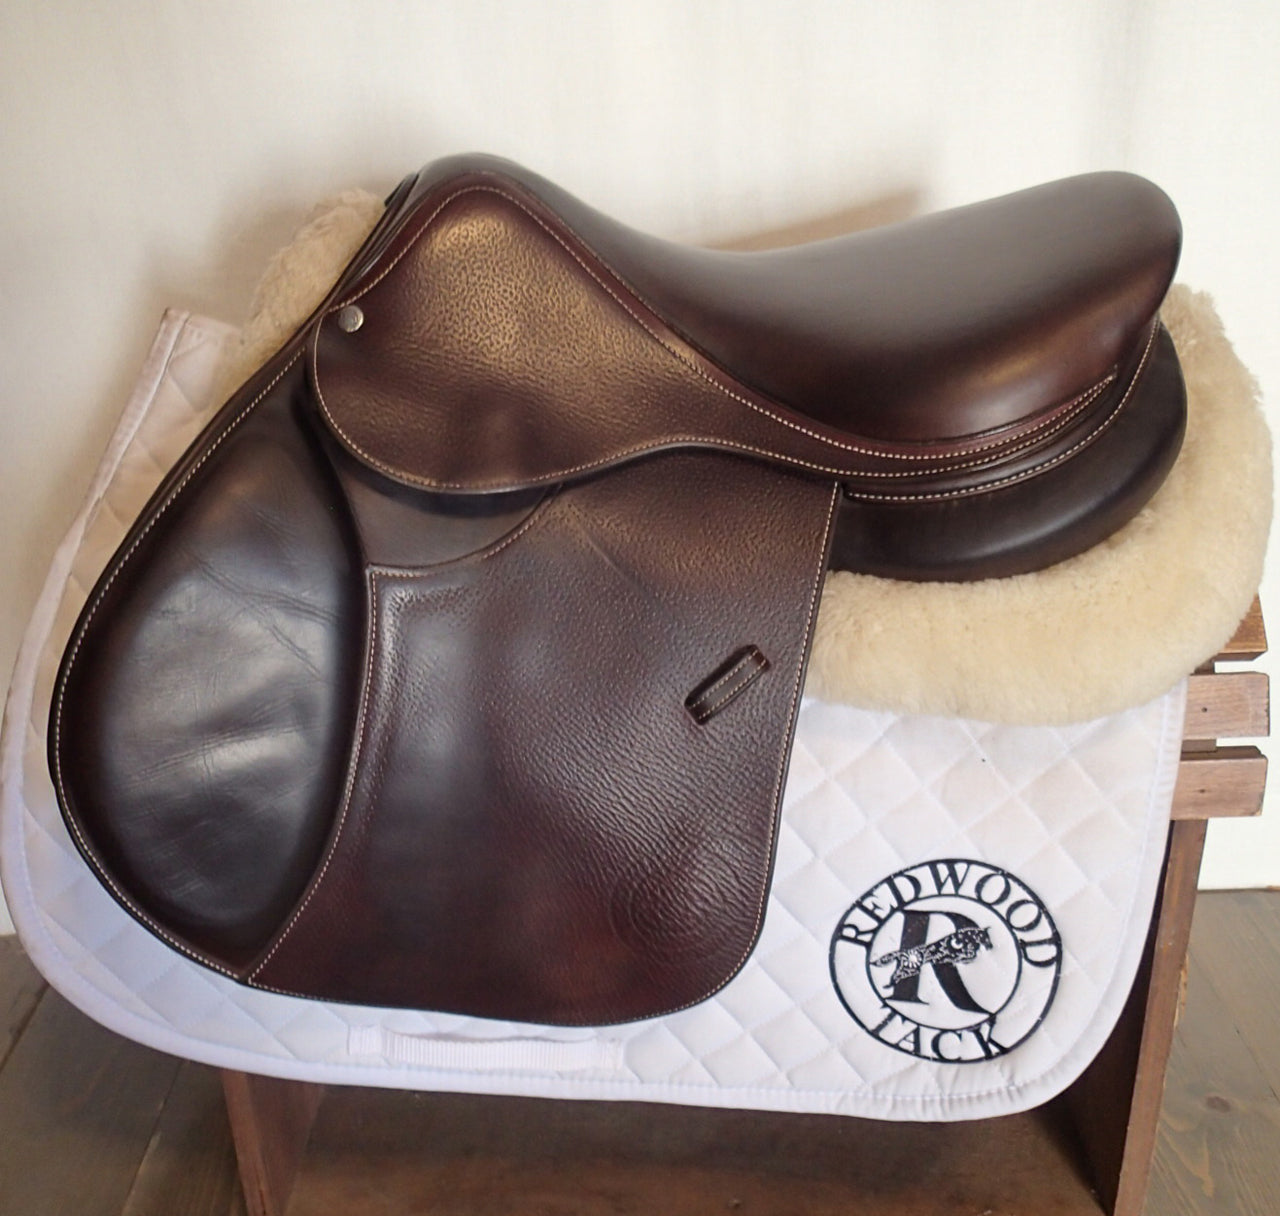 17" Forestier by Voltaire Seoul Saddle - 2022 - 2A Flaps - 4.75" dot to dot - Pro Panels